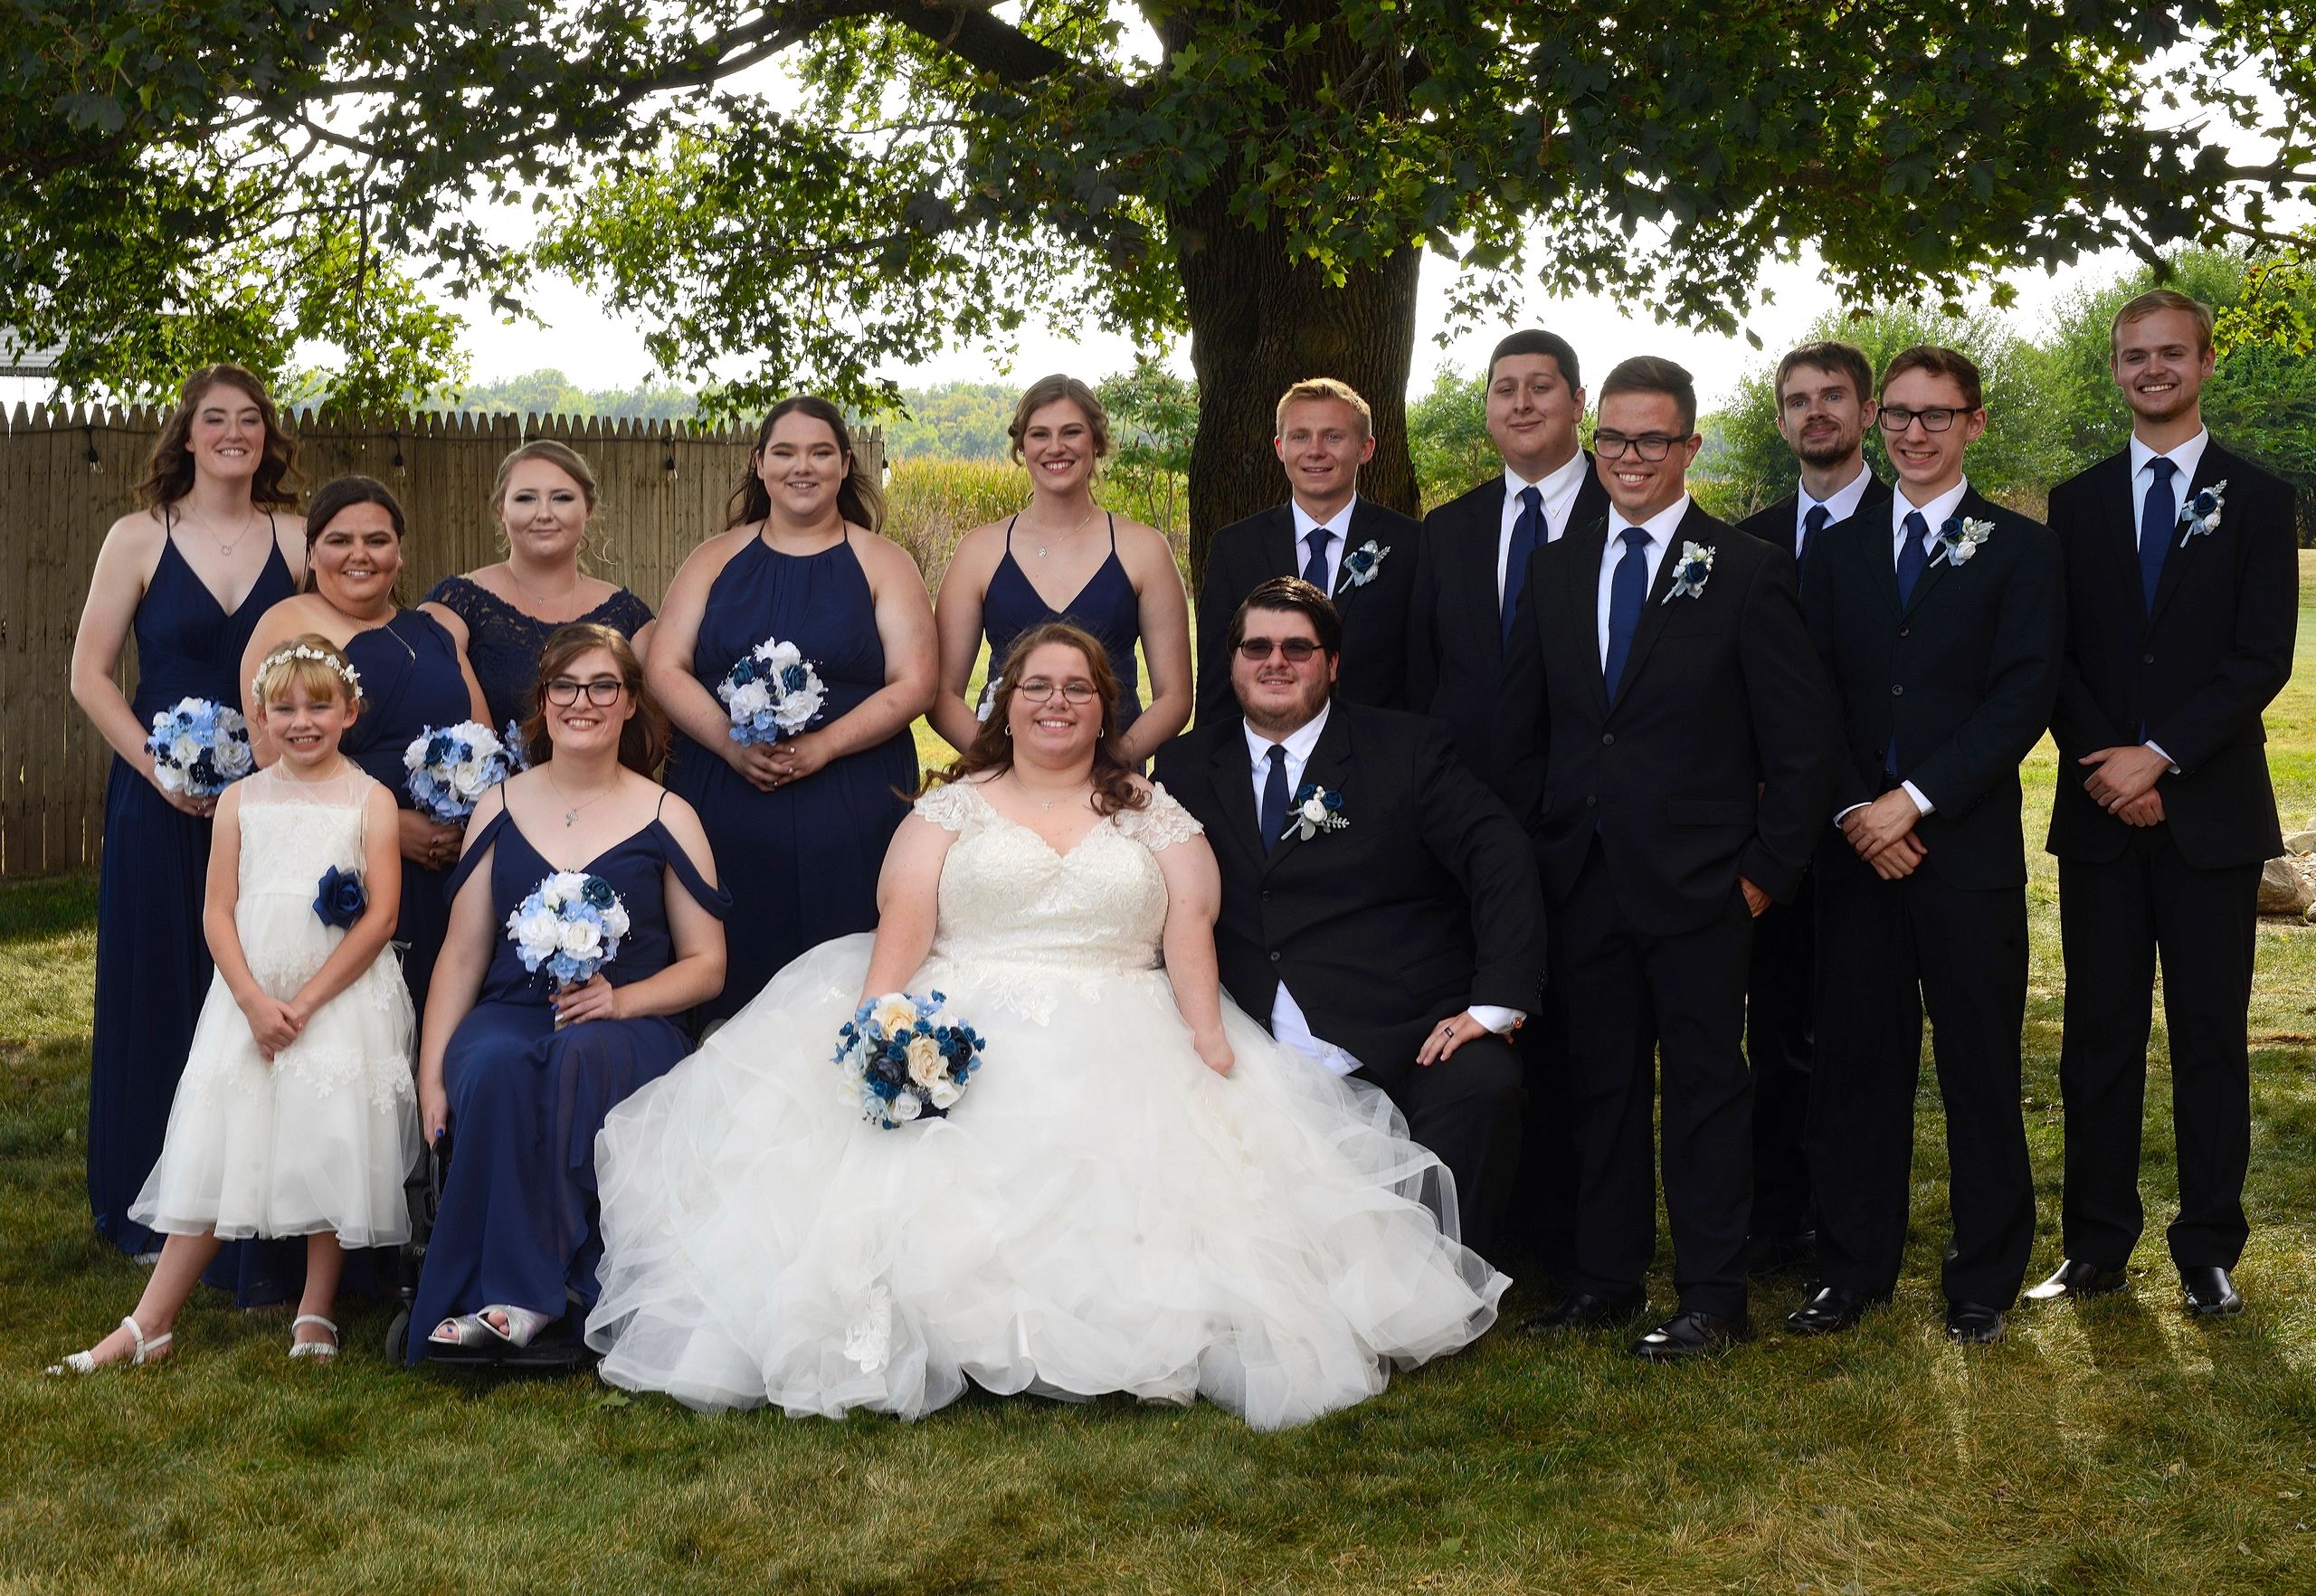 Wedding Party with Bride, Groom and also Bridesmaids and Groomsmen